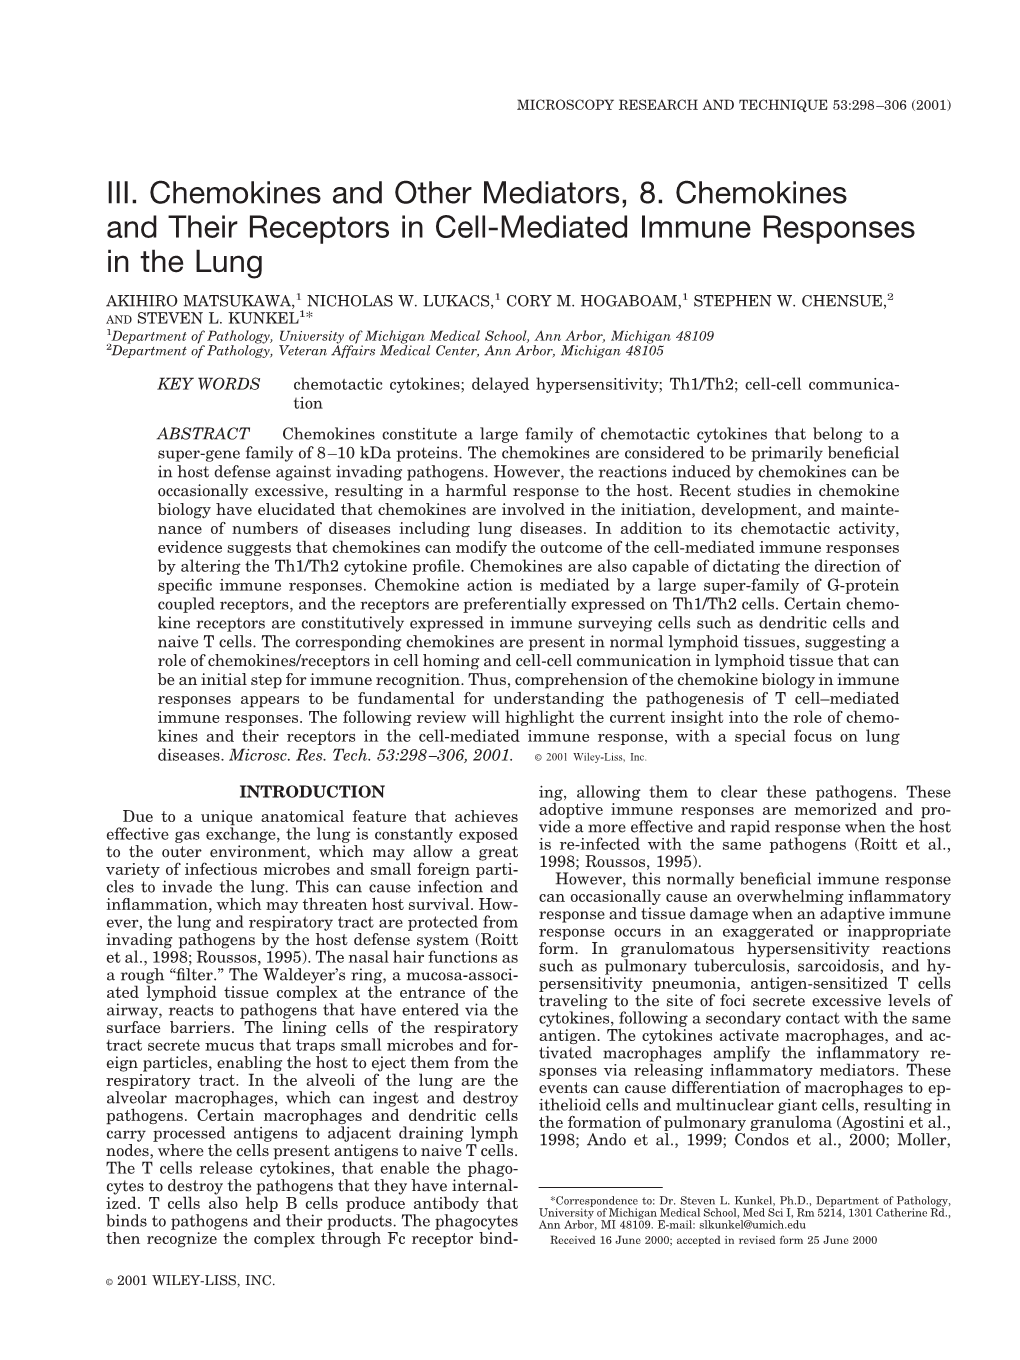 III. Chemokines and Other Mediators, 8. Chemokines and Their Receptors in Cell-Mediated Immune Responses in the Lung